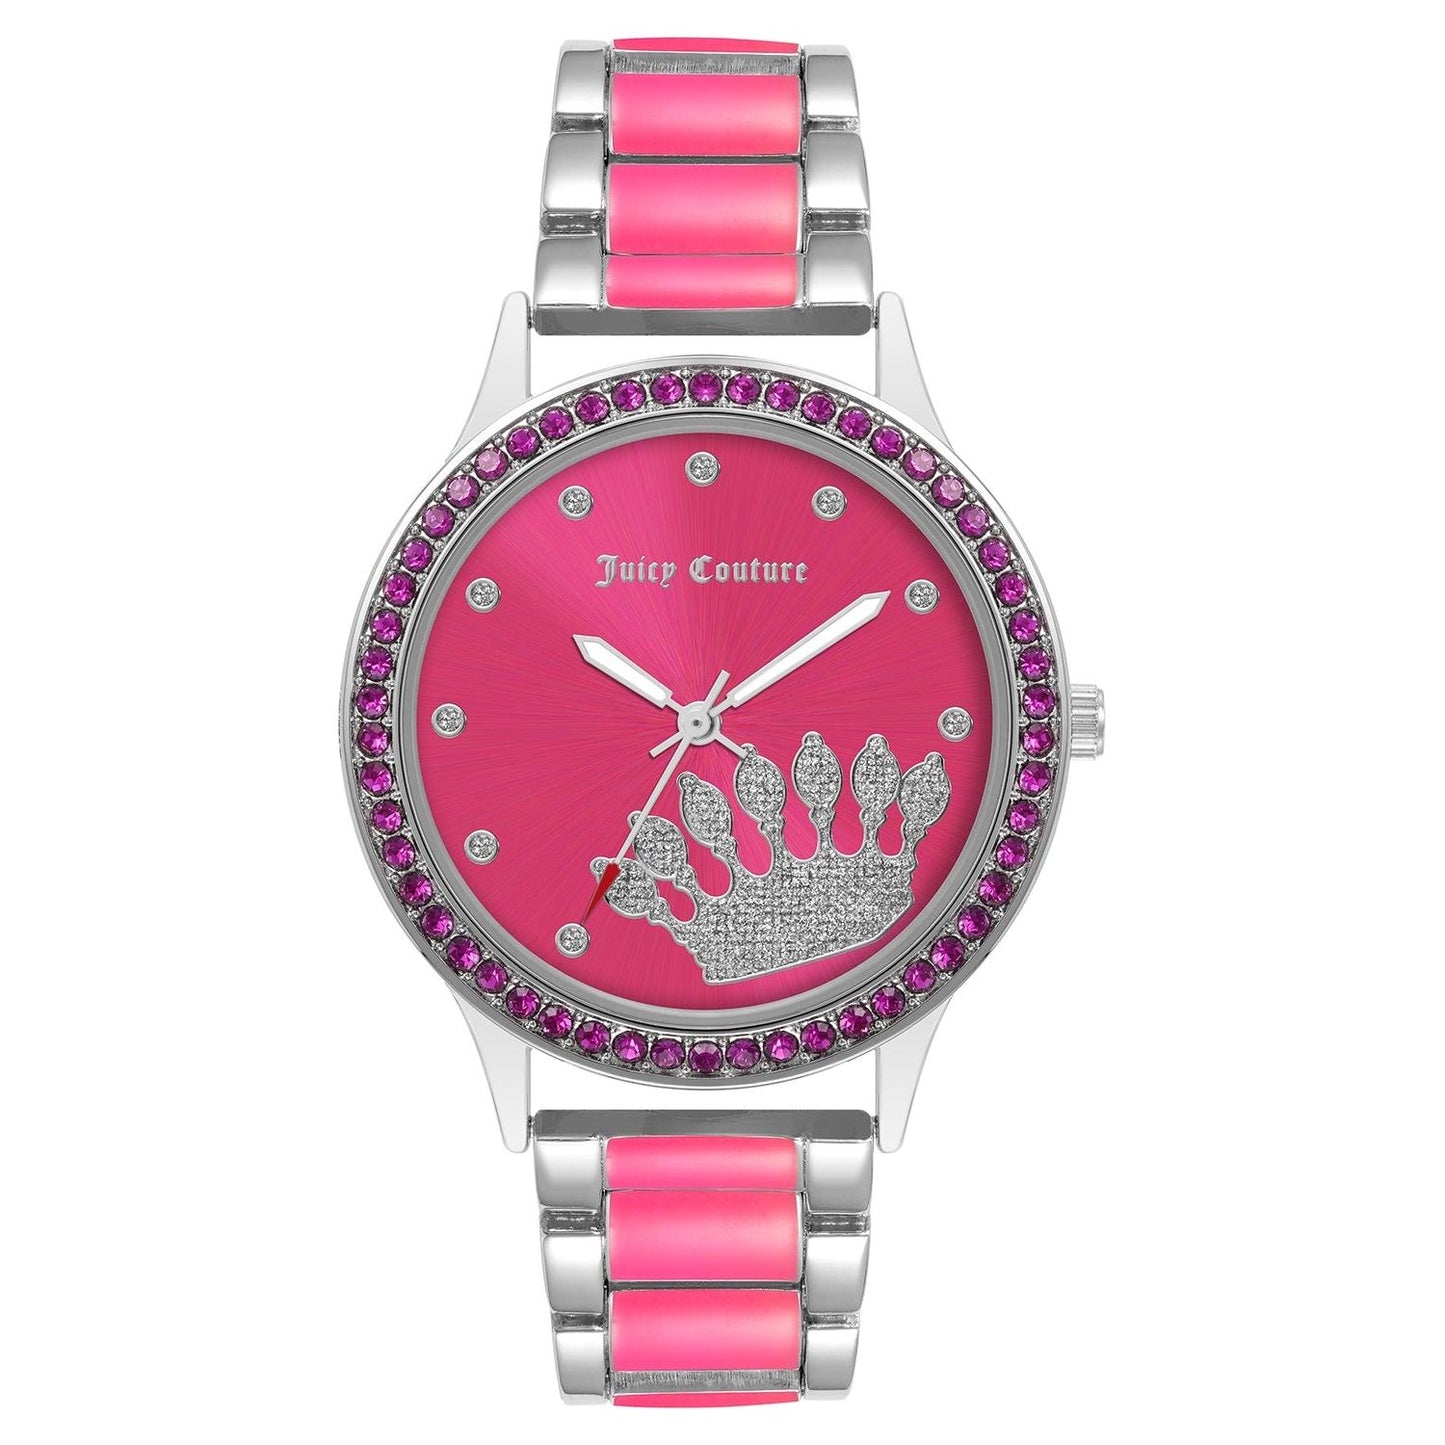 JUICY COUTURE JUICY COUTURE MOD. JC_1335SVHP WATCHES juicy-couture-mod-jc_1335svhp